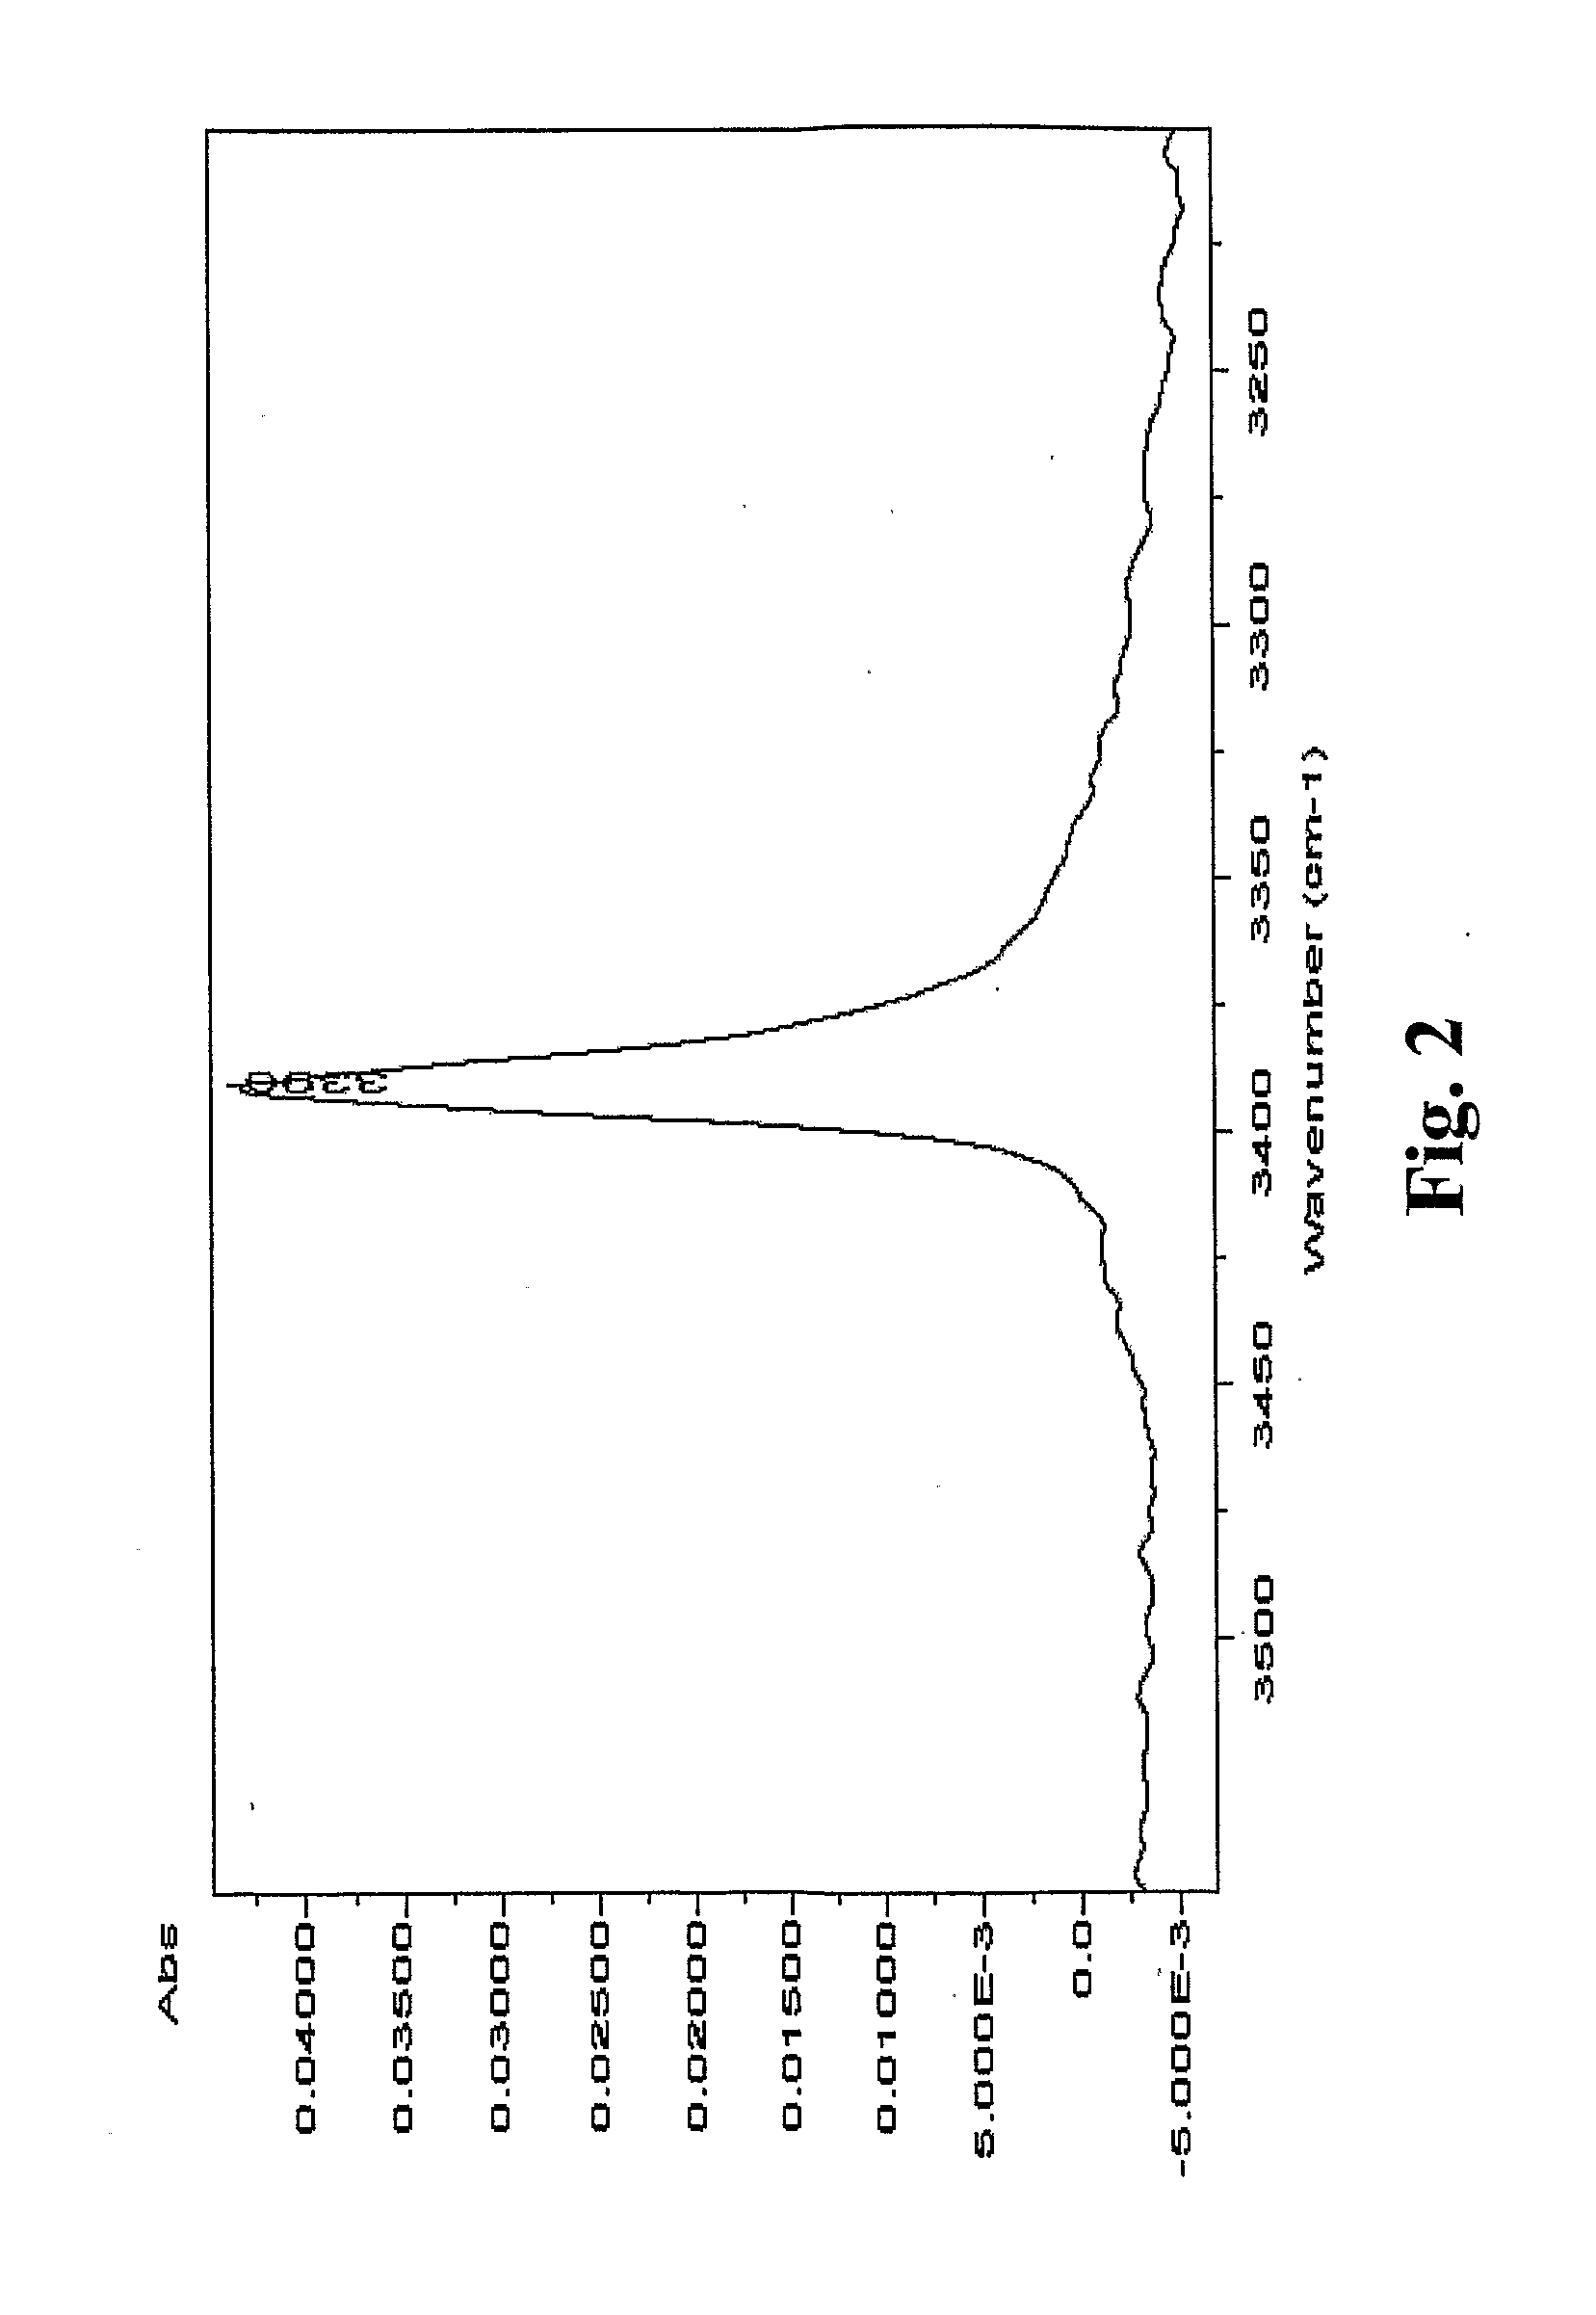 Process for preparing pyridinamines and novel polymorphs thereof